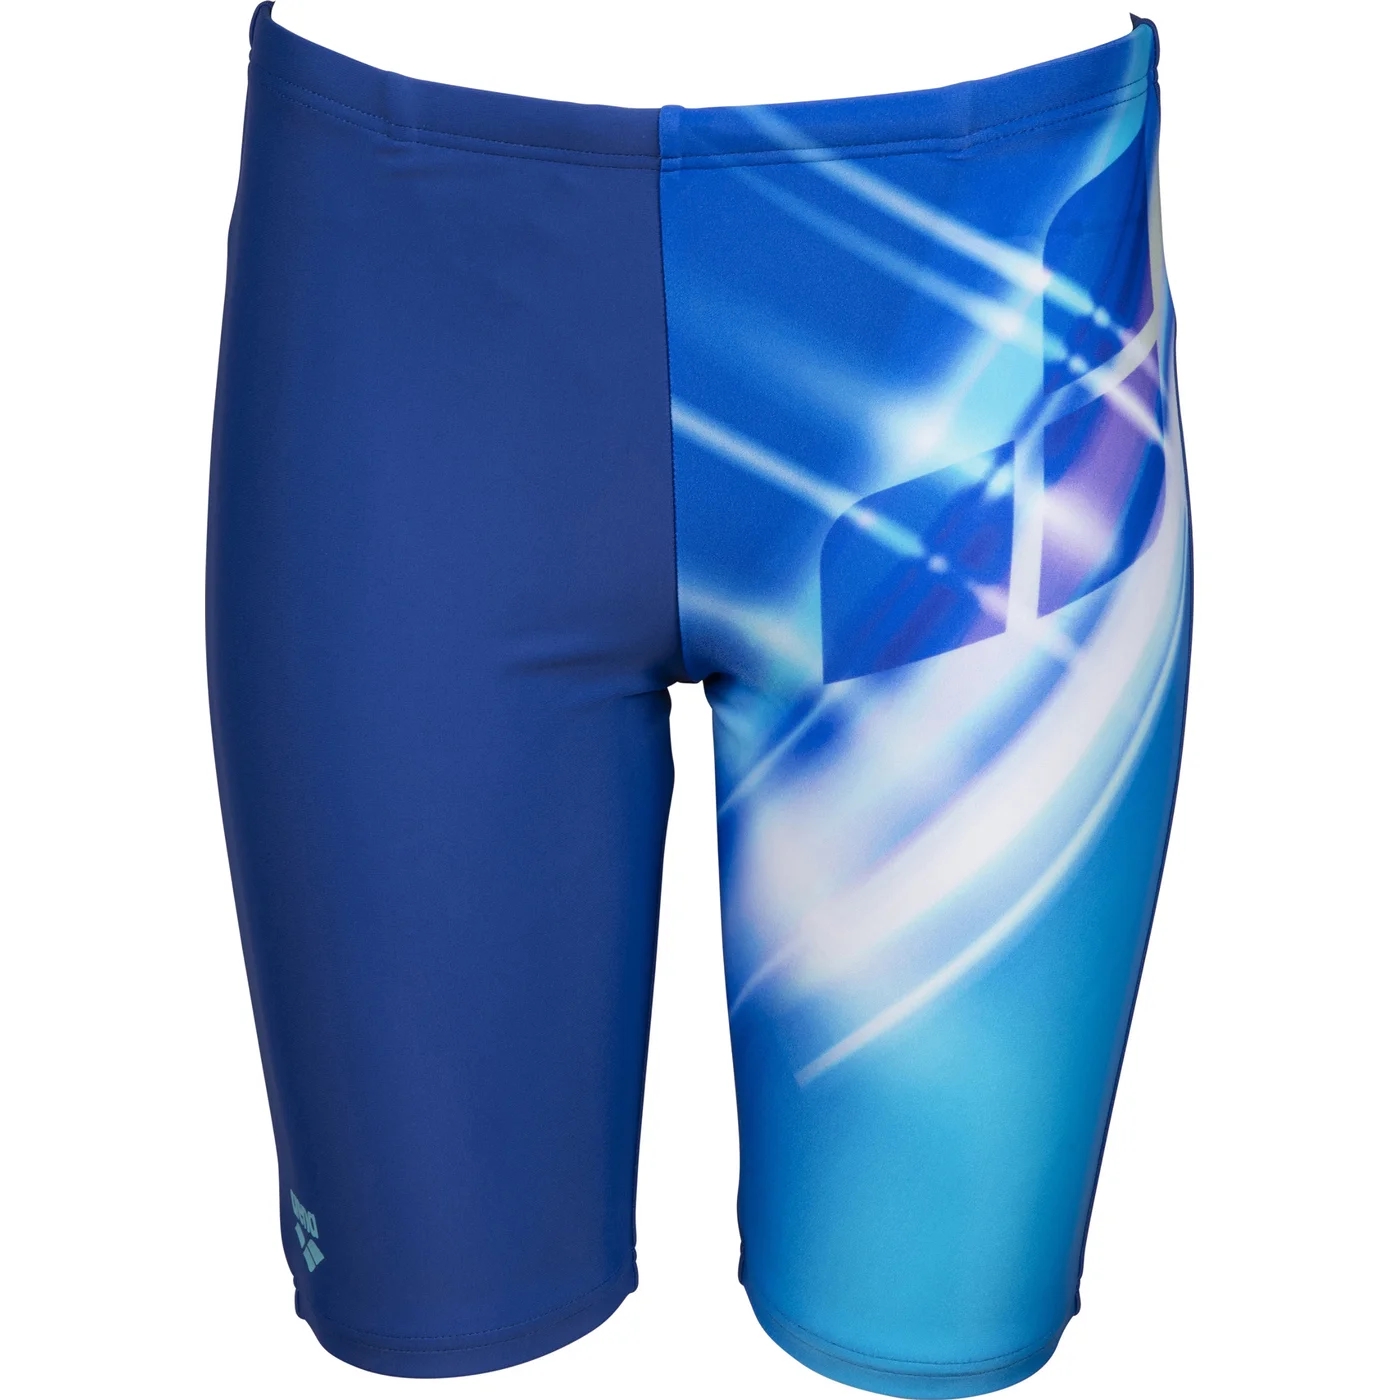 ARENA ARENA JUNGEN BADEHOSE JAMMER CHEERY ROYAL-MULTI 4